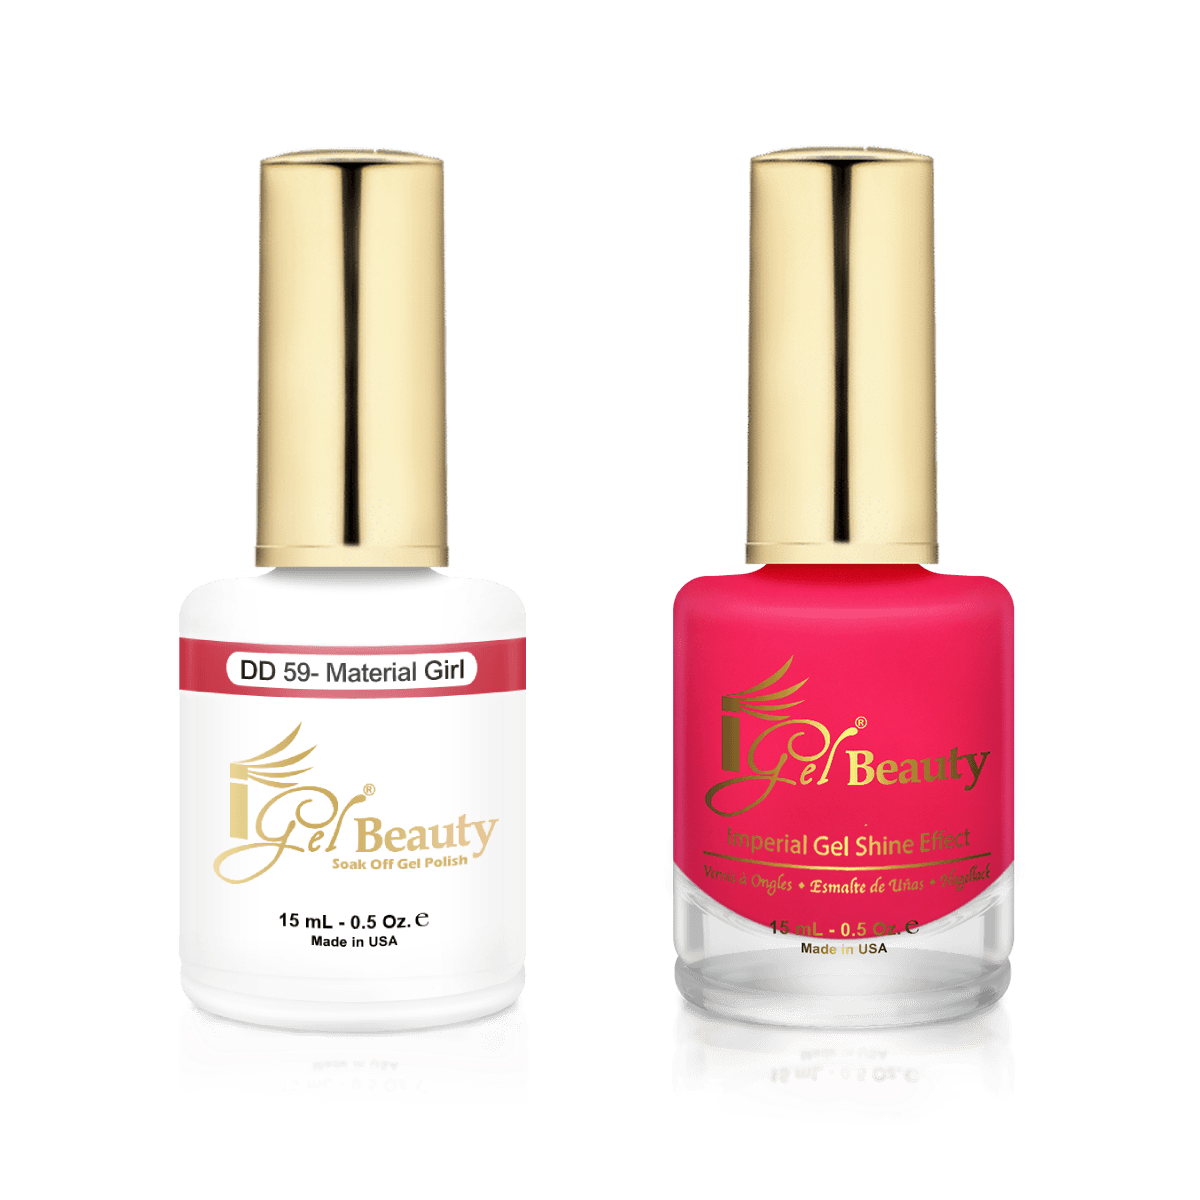 IGel Duo Gel Polish + Matching Nail Lacquer DD 59 MATERIAL GIRL